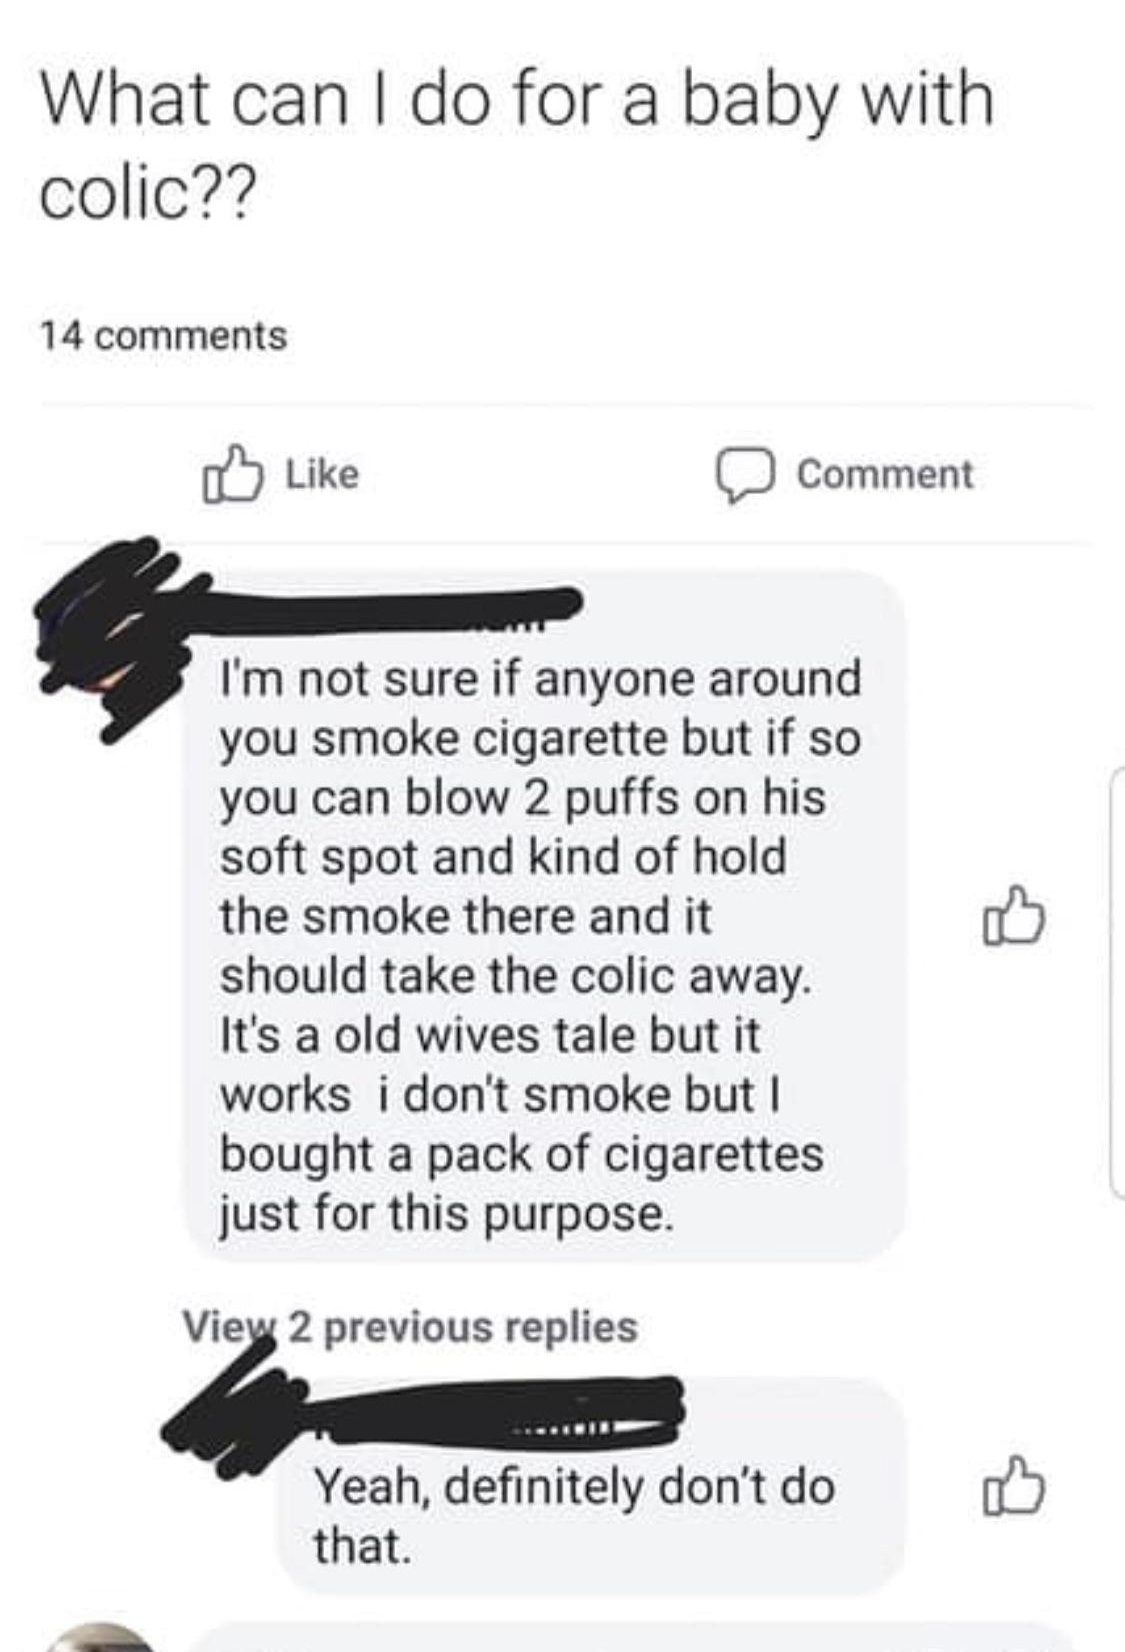 descriptive paragraph - What can I do for a baby with colic?? 14 Comment I'm not sure if anyone around you smoke cigarette but if so you can blow 2 puffs on his soft spot and kind of hold the smoke there and it should take the colic away. It's a old wives